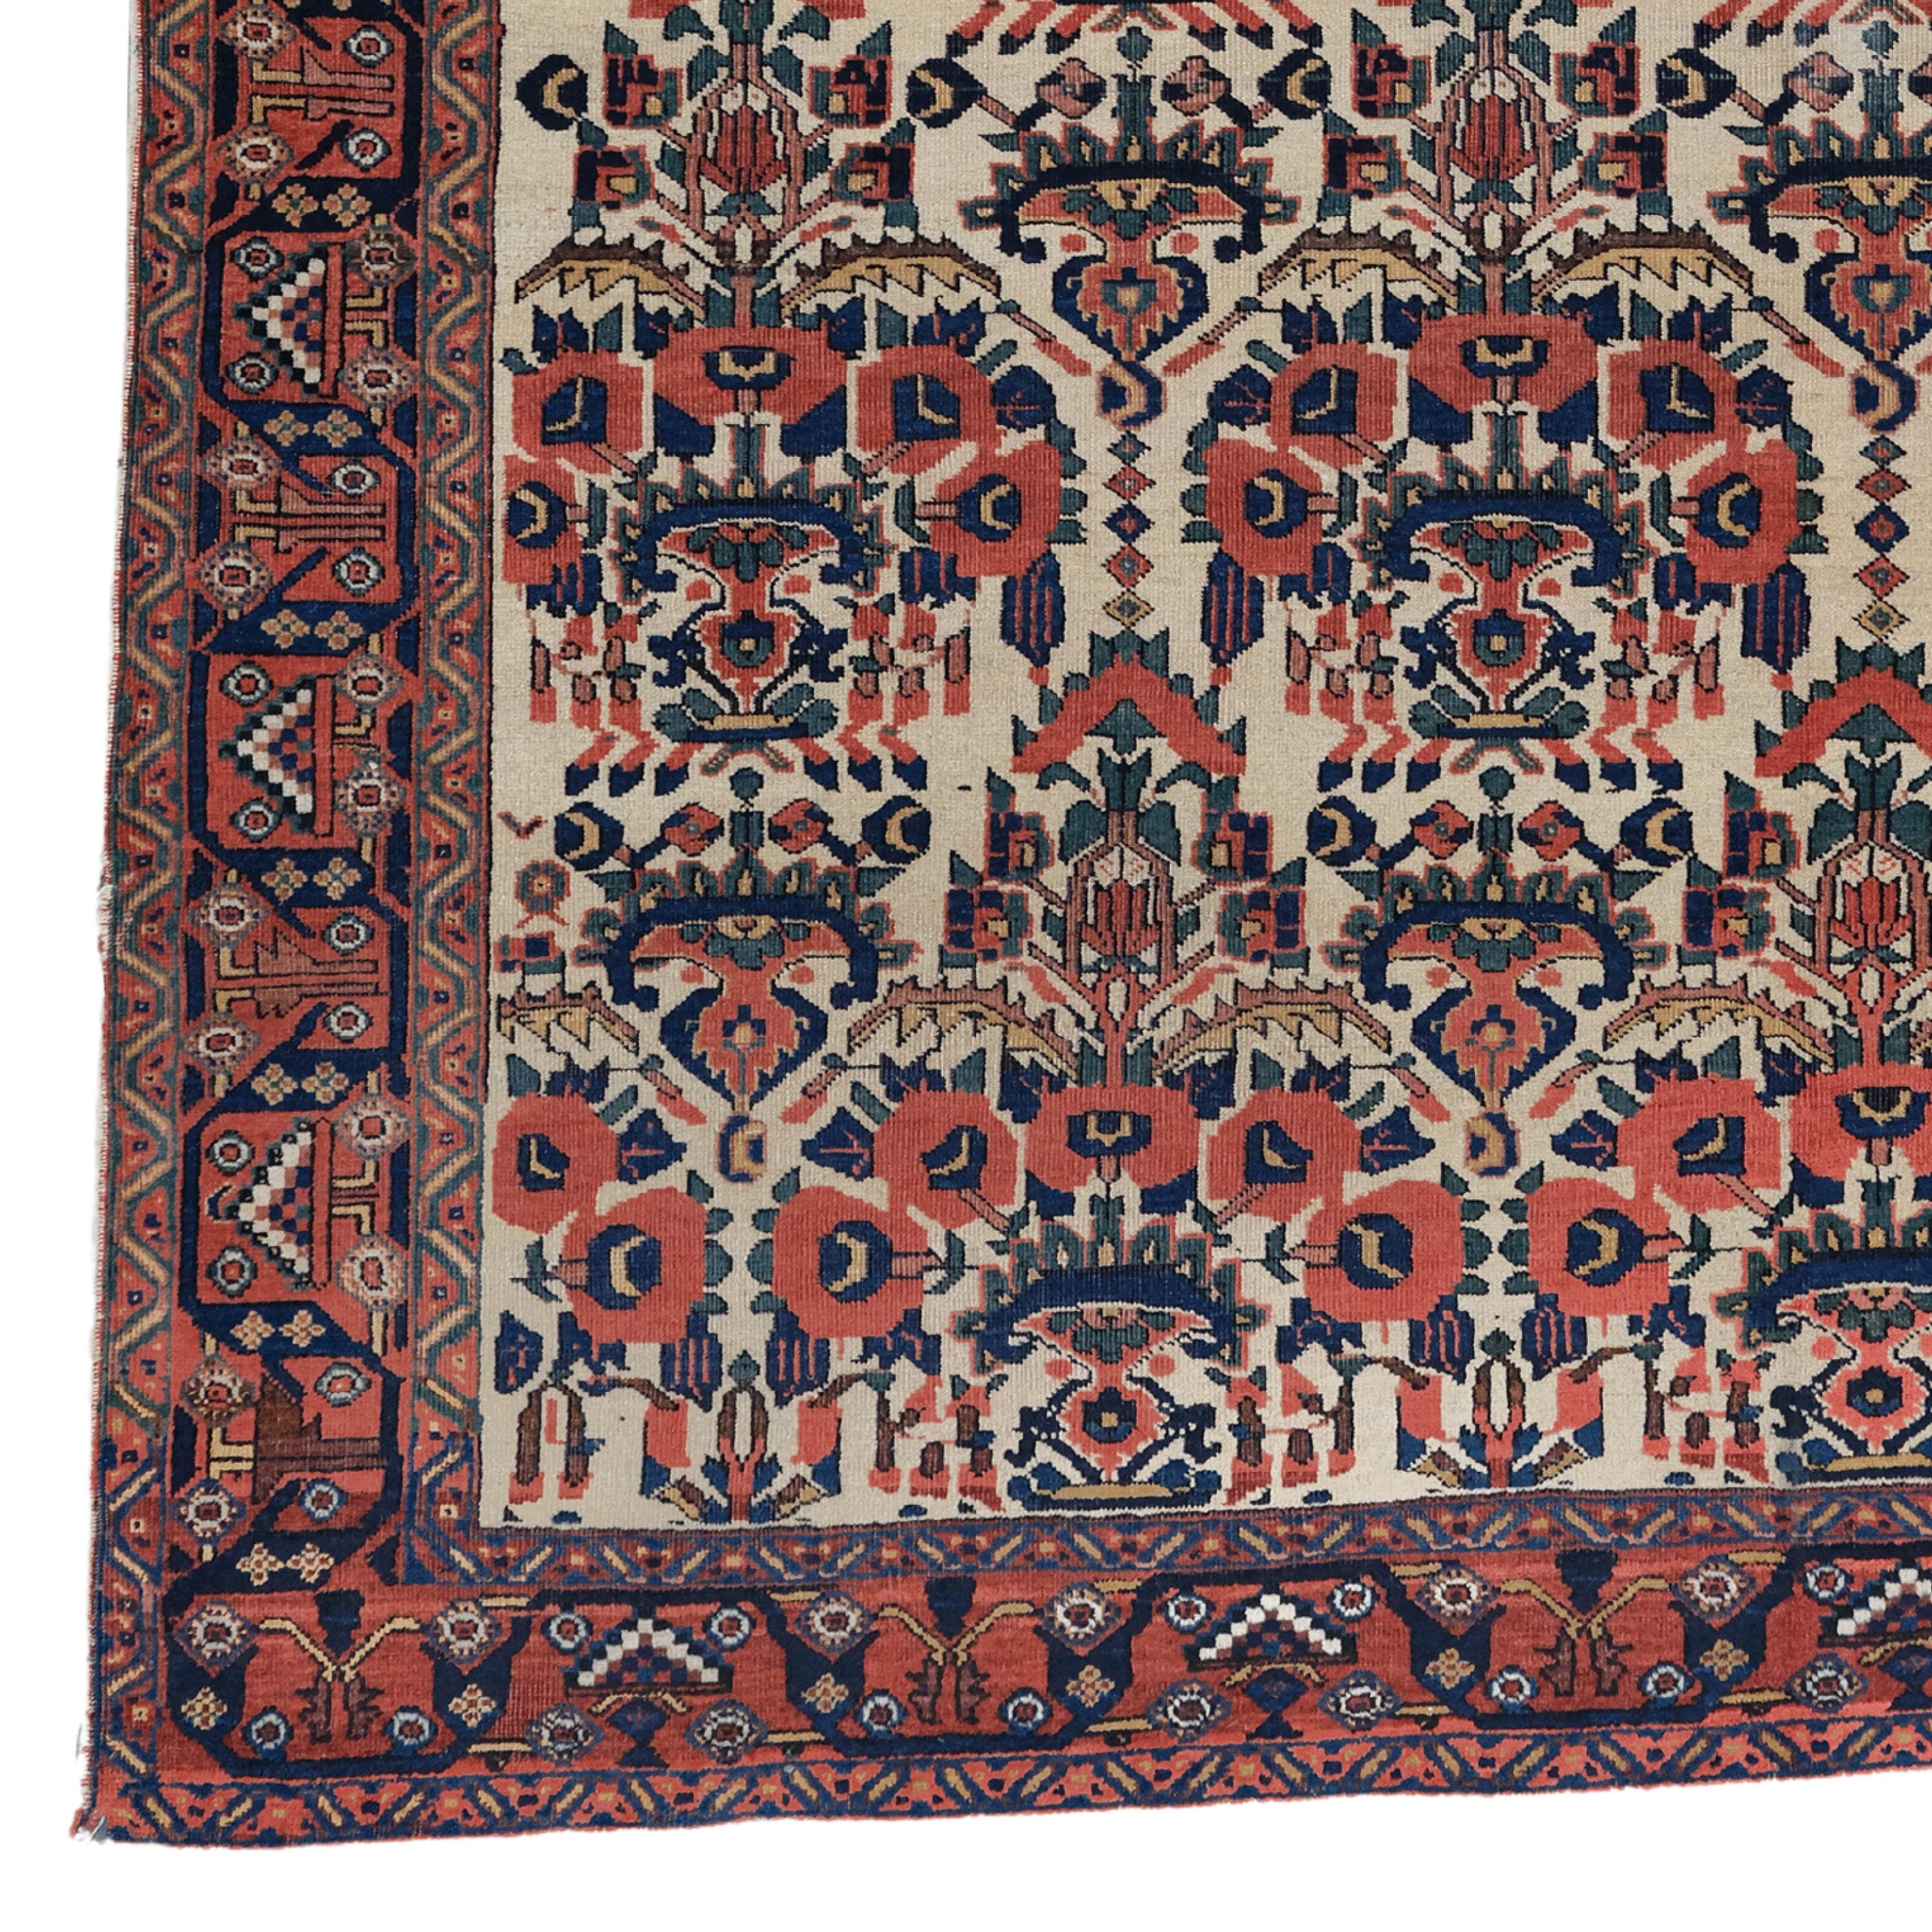 19th Century Afshar Rug

This extraordinary carpet will fascinate you with its intricate designs and vibrant colors that reflect the rich history and craftsmanship of the period. Each stitch tells the story of skilled craftsmen who masterfully